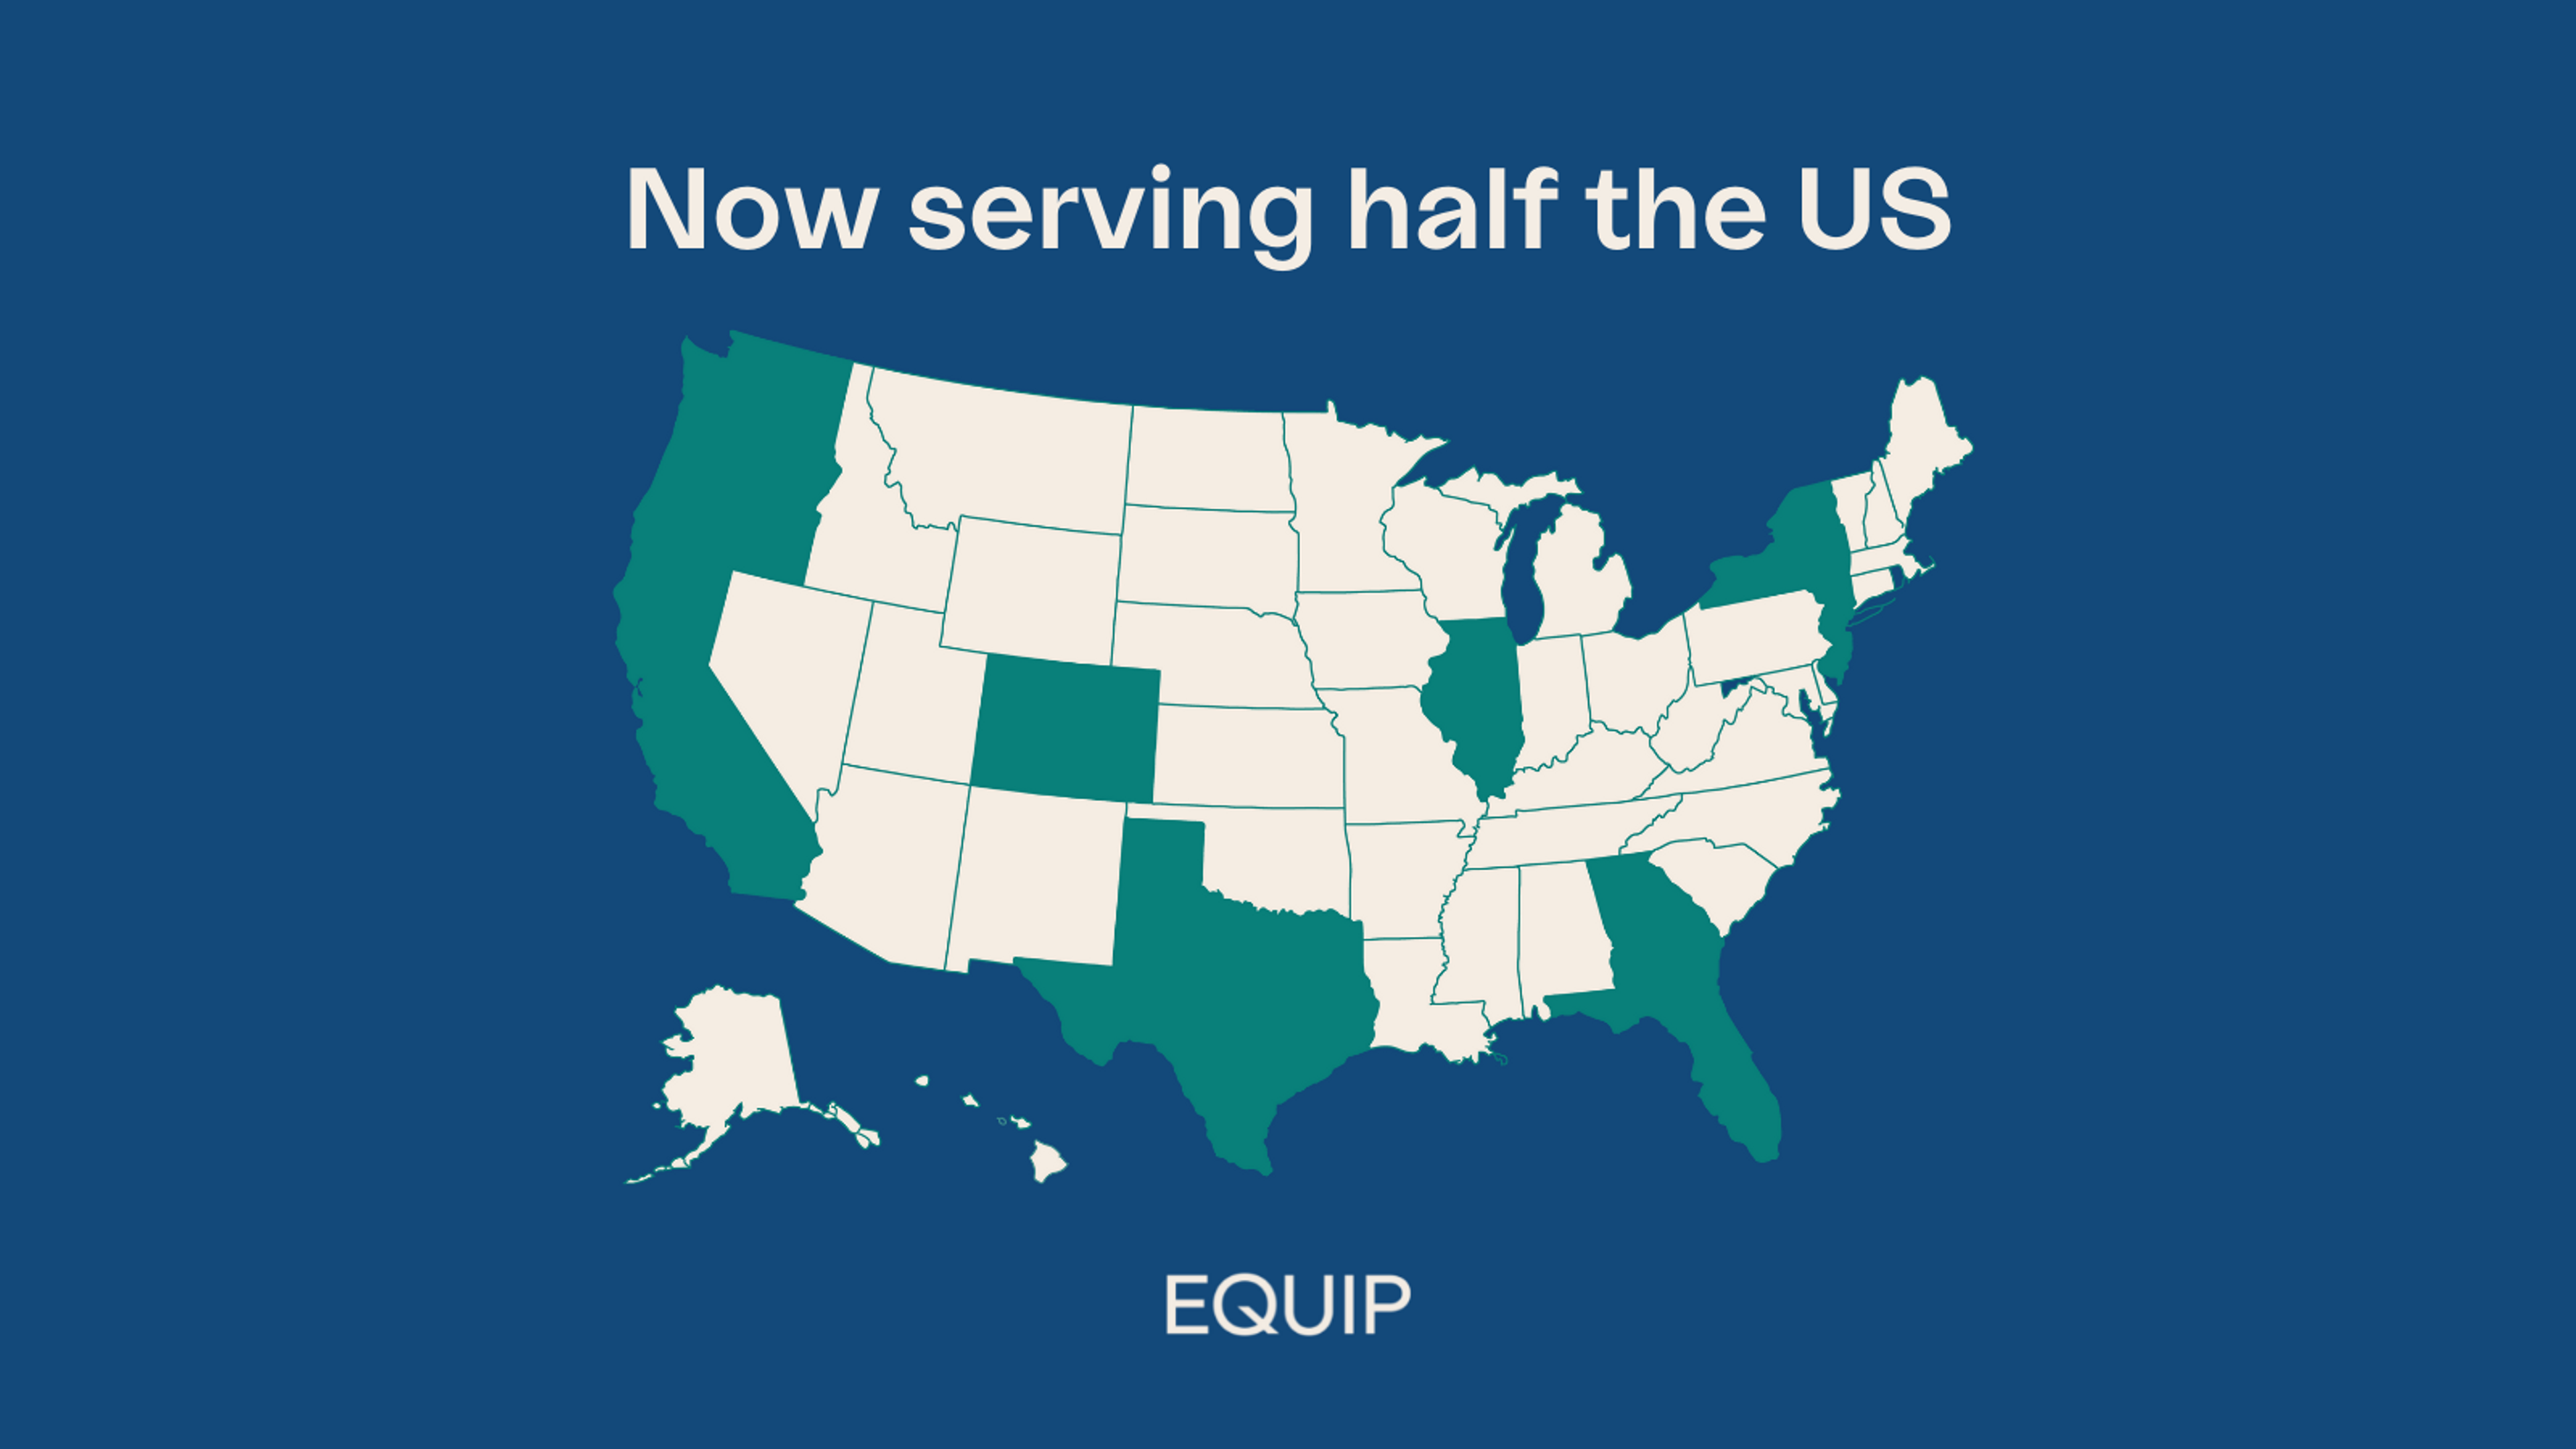 A map of the U.S. with the Equip logo and the words "Now serving half the US"